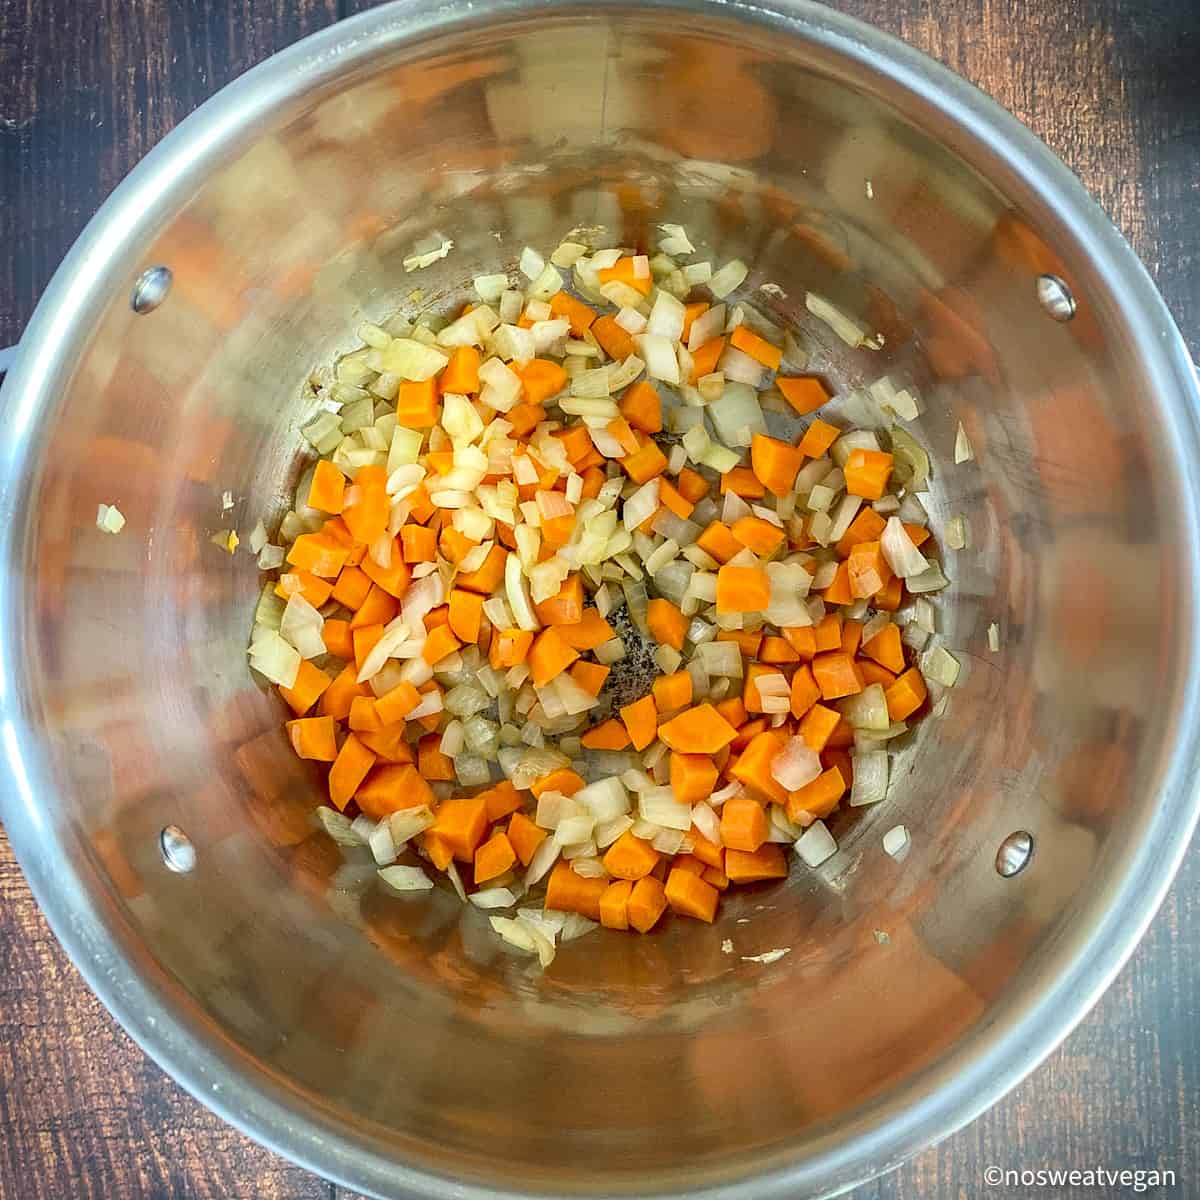 Diced onions and carrots cooking in a pot.